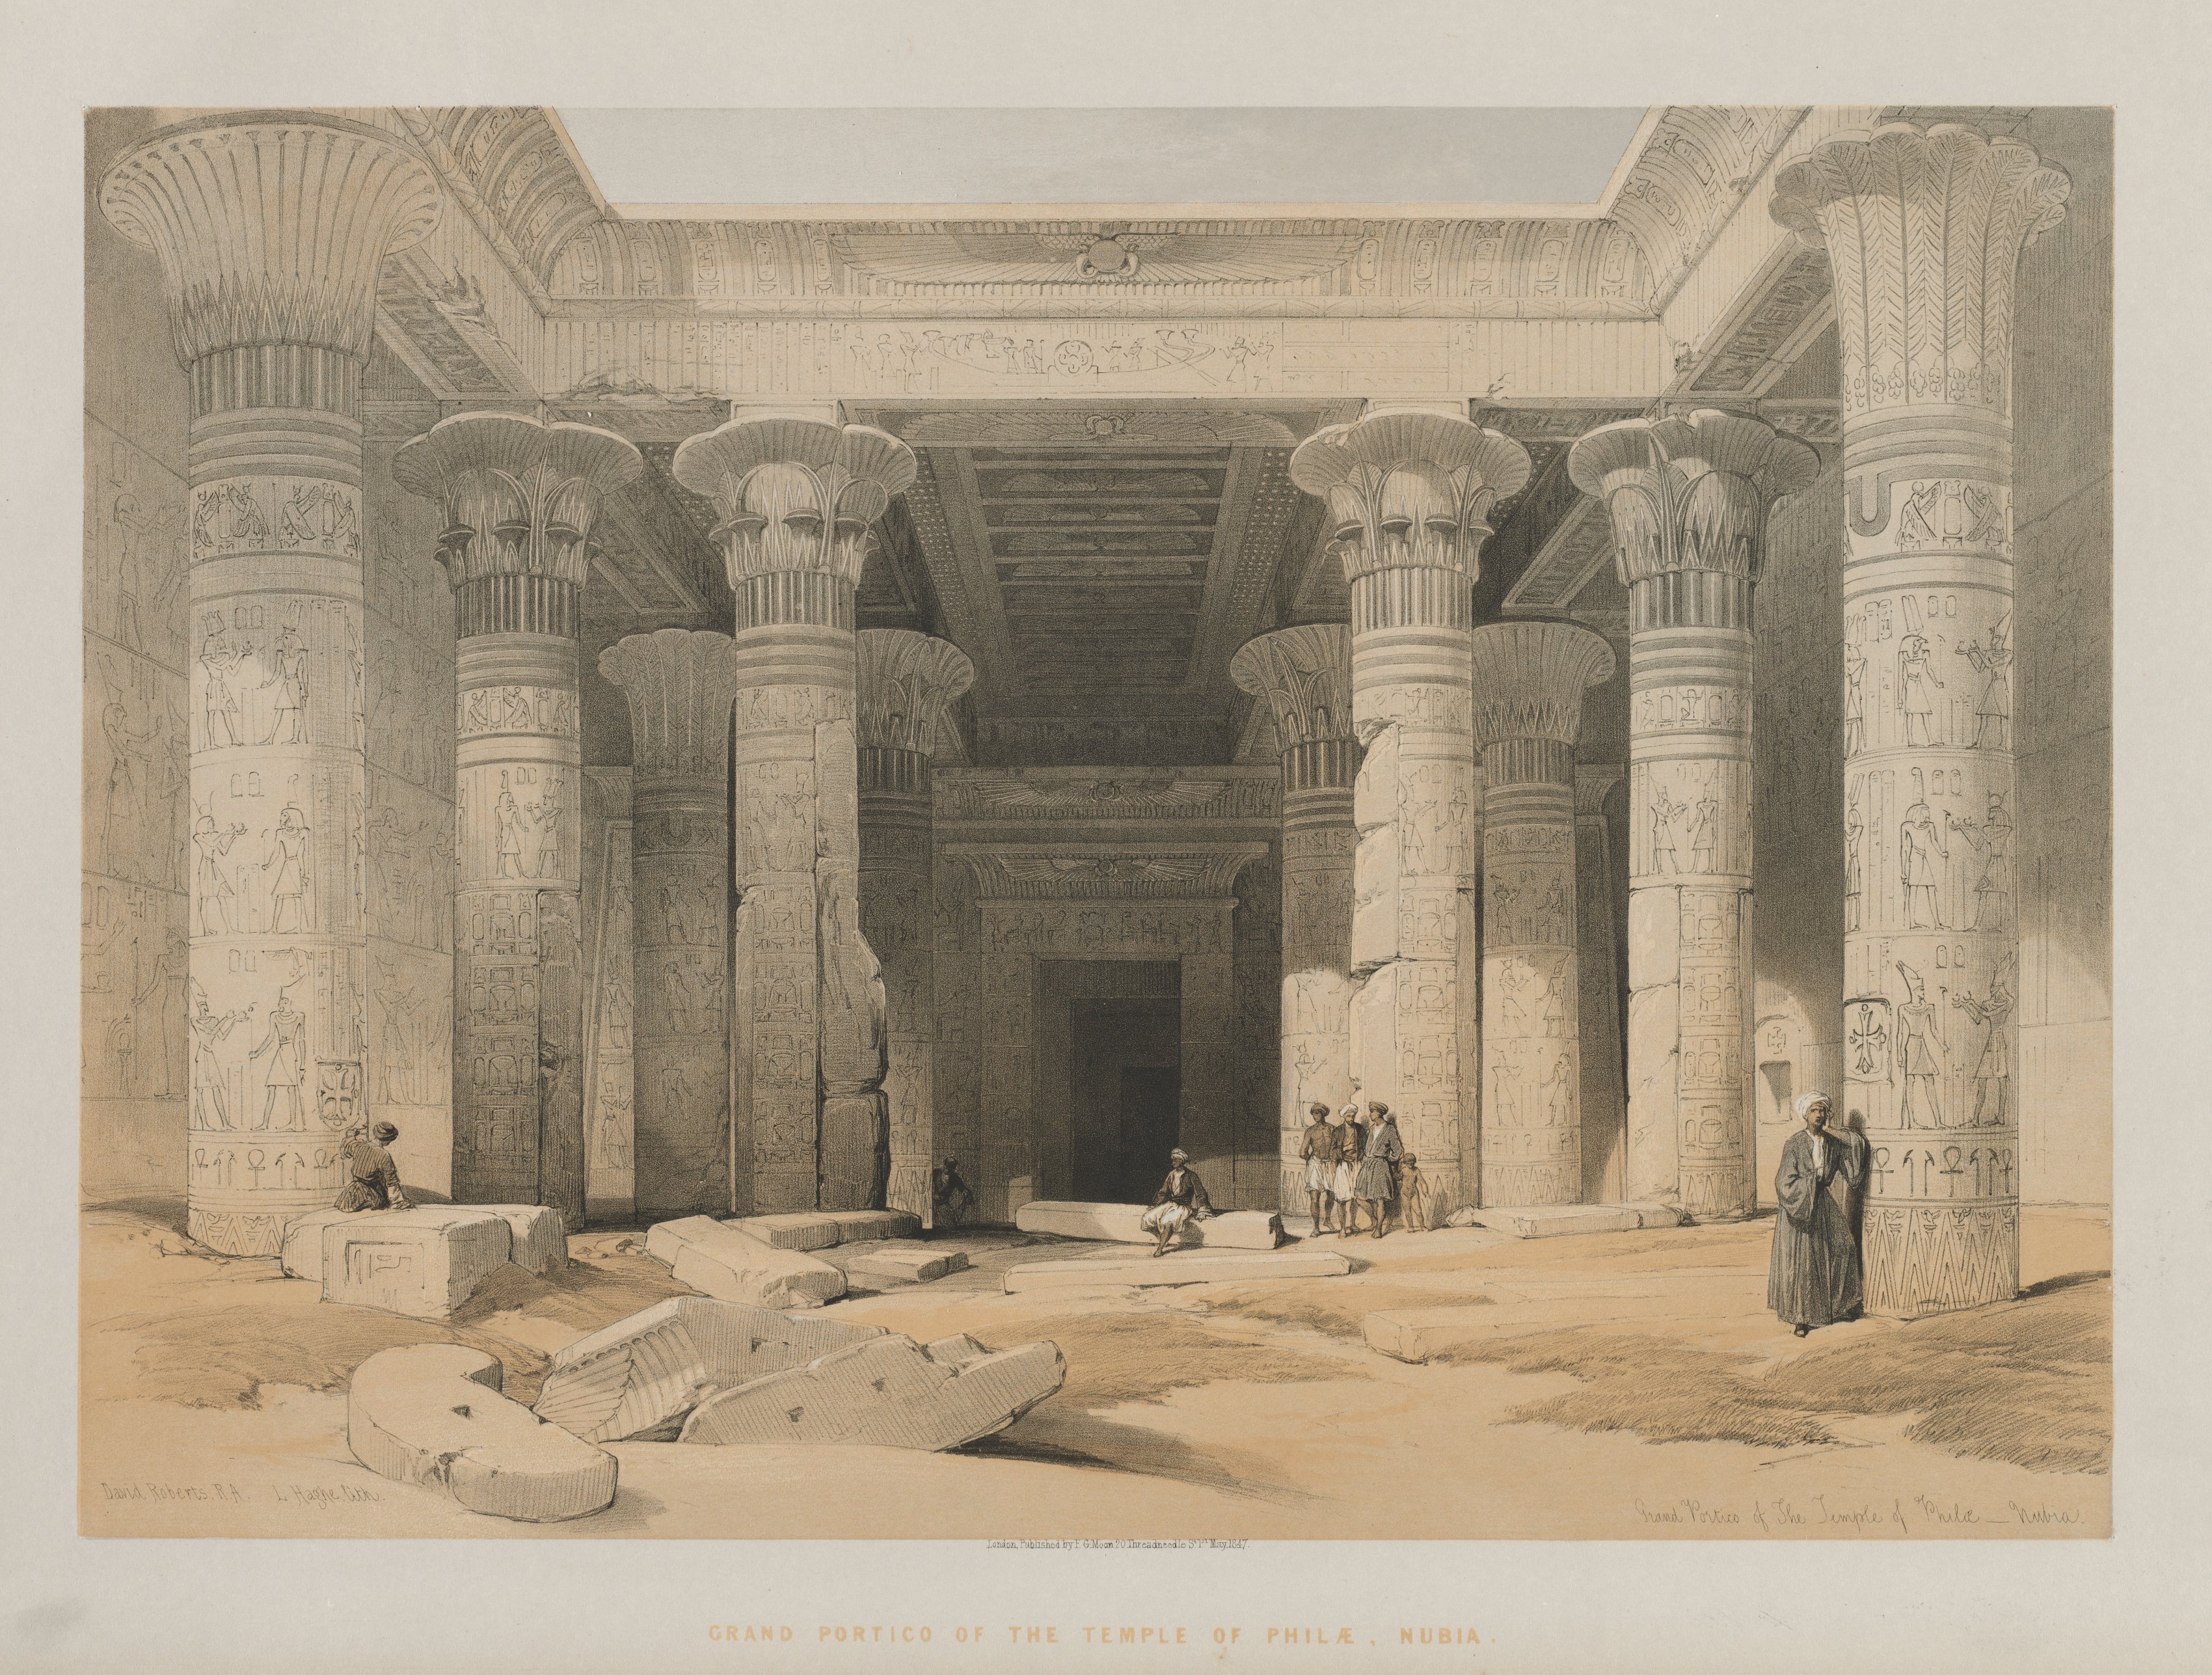 Egypt and Nubia, Volume I: Grand Portico of the Temple of Philae, Nubia